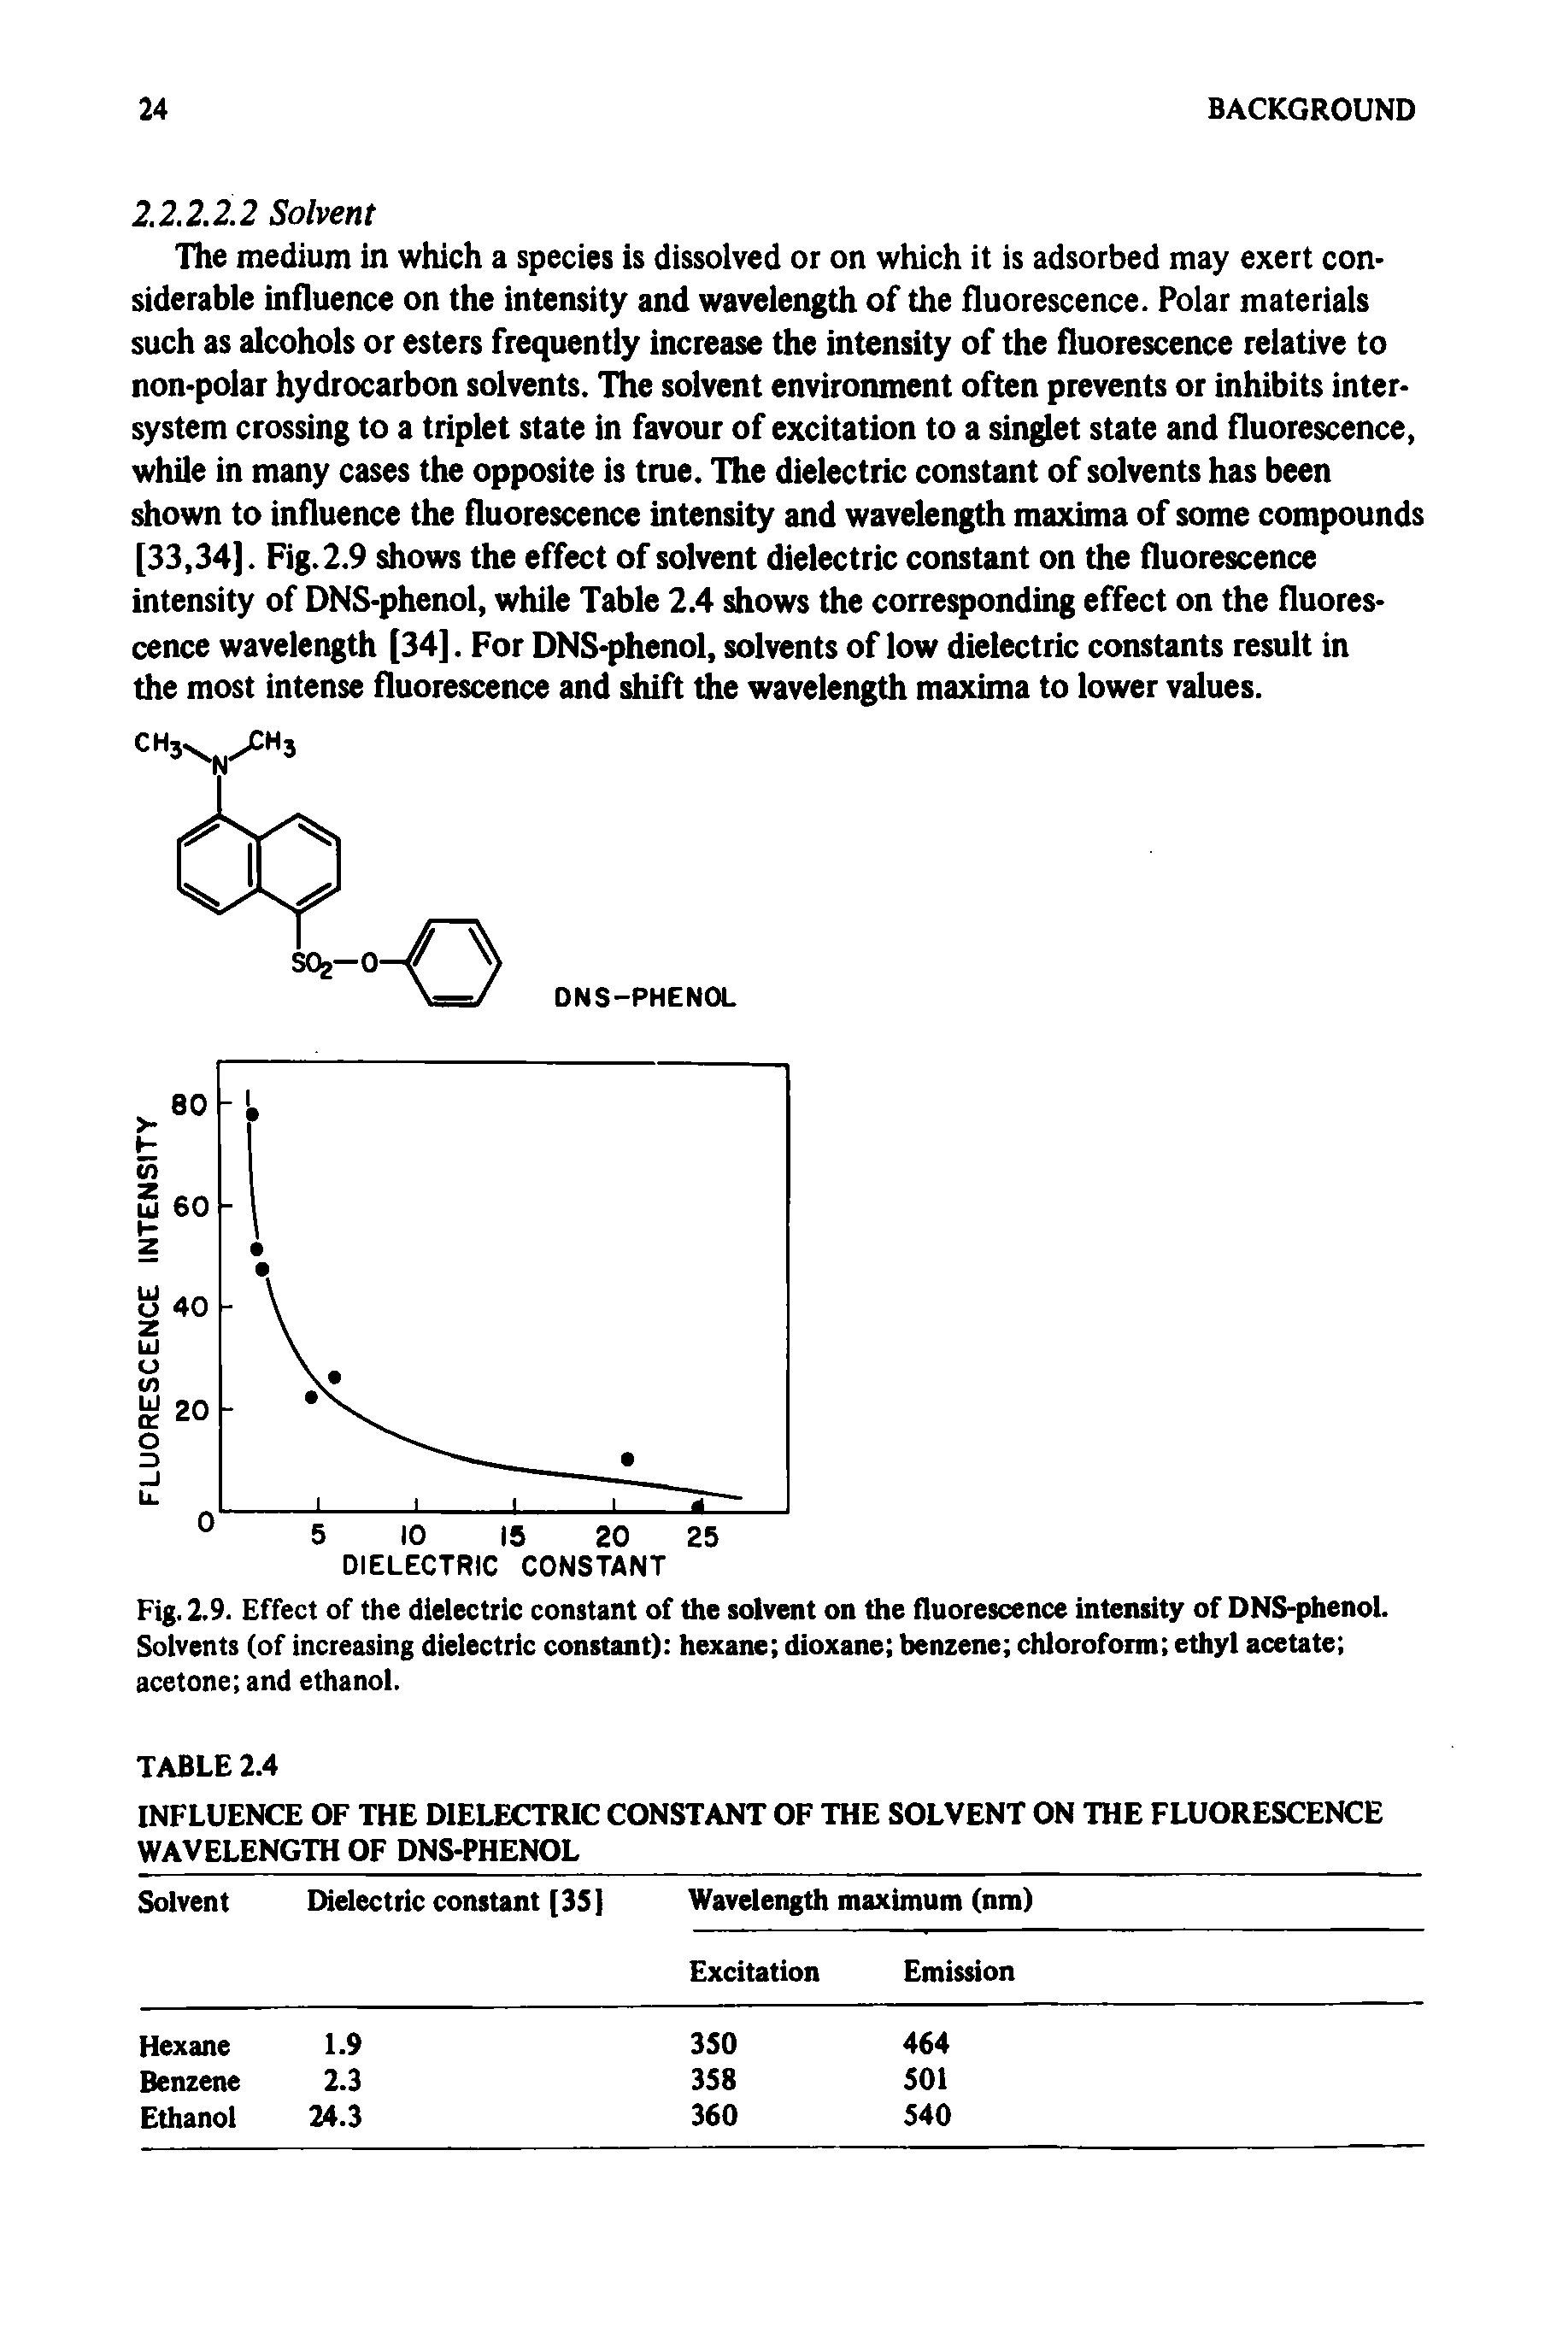 Fig. 2.9. Effect of the dielectric constant of the solvent on the fluorescence intensity of DNS-phenol. Solvents (of increasing dielectric constant) hexane dioxane benzene chloroform ethyl acetate acetone and ethanol.